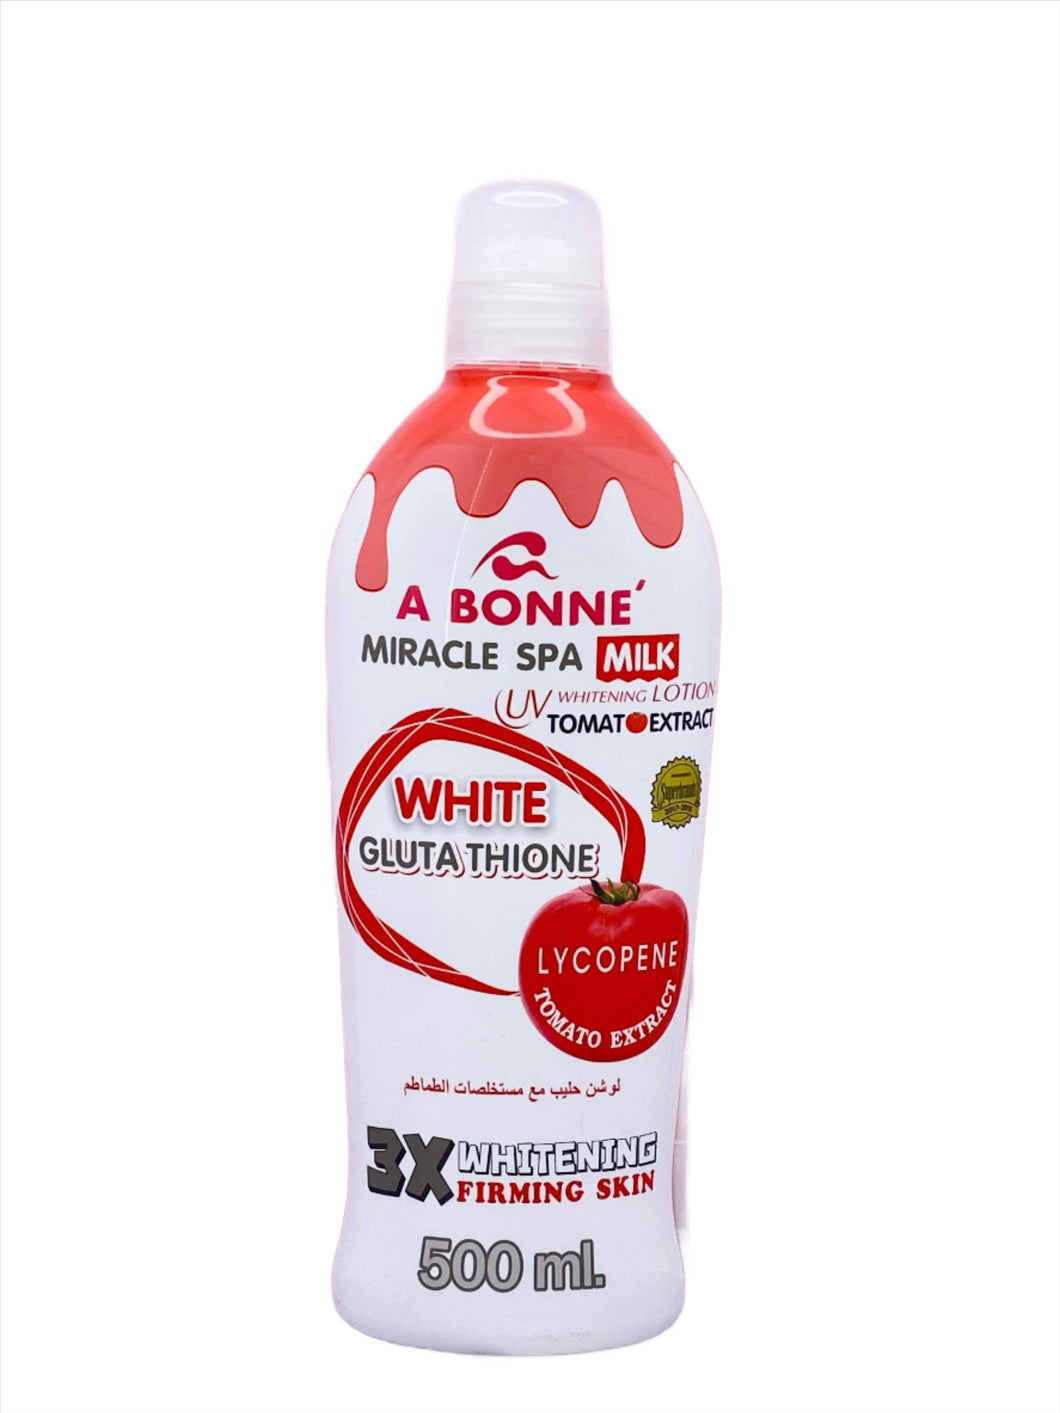 A Bonne Miracle Spa Milk (UV Whitening Lotion) 500 ml Authentic Thailand